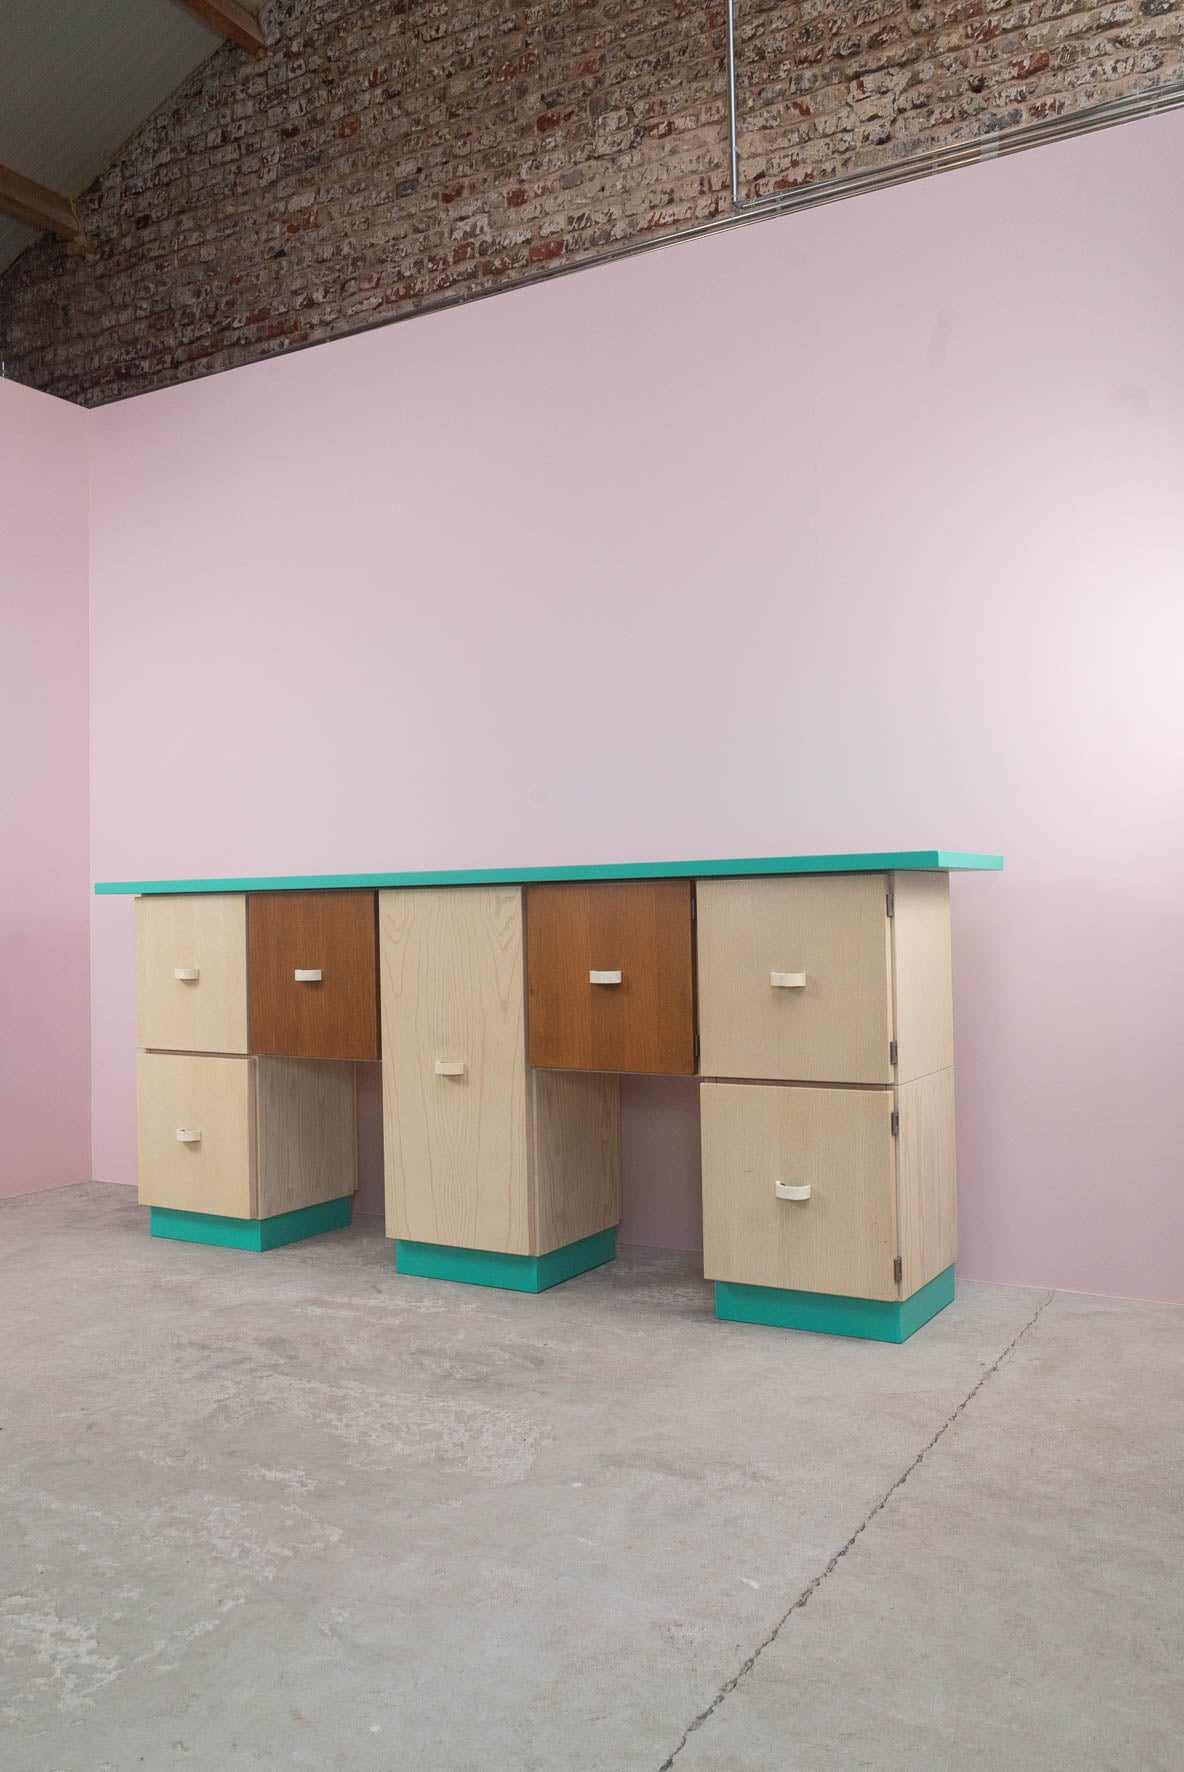 Sideboard by Albert Leclerc for Planula